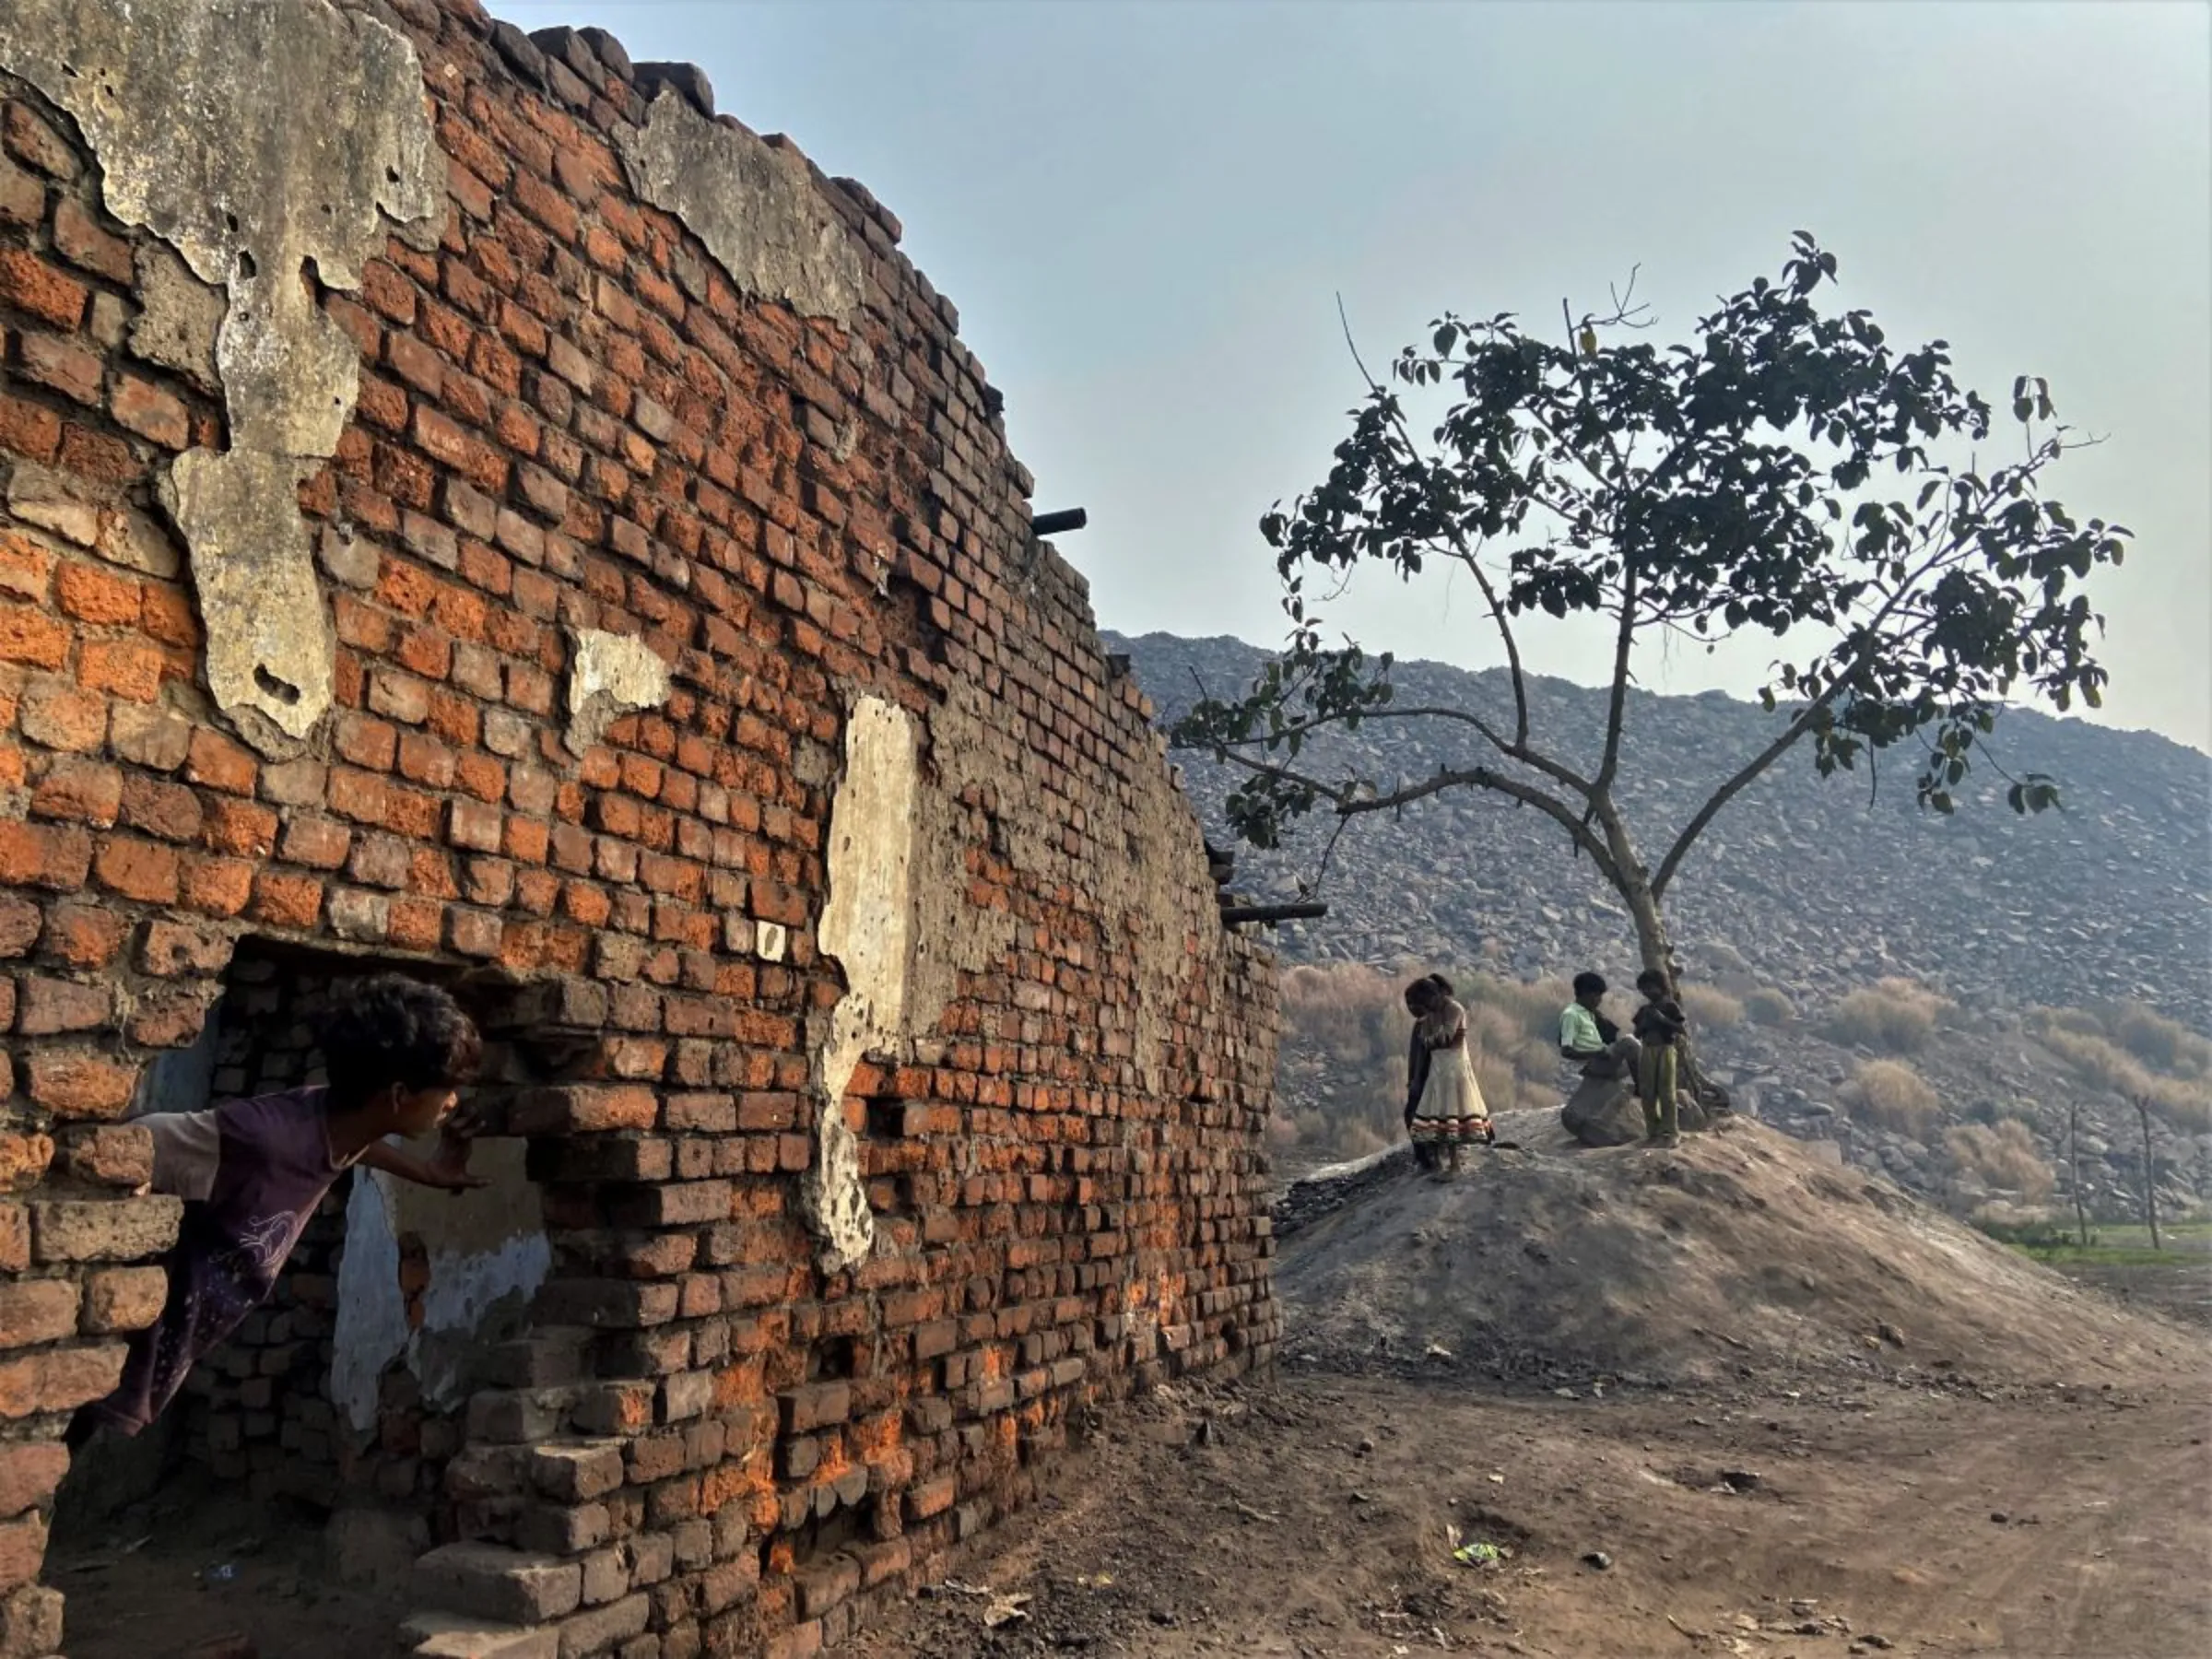 Children play in front of a hillock of debris from recent mine excavations at Golakdhi settlement in Jharia coalfield, India, on November 10, 2022. Thomson Reuters Foundation/Roli Srivastava